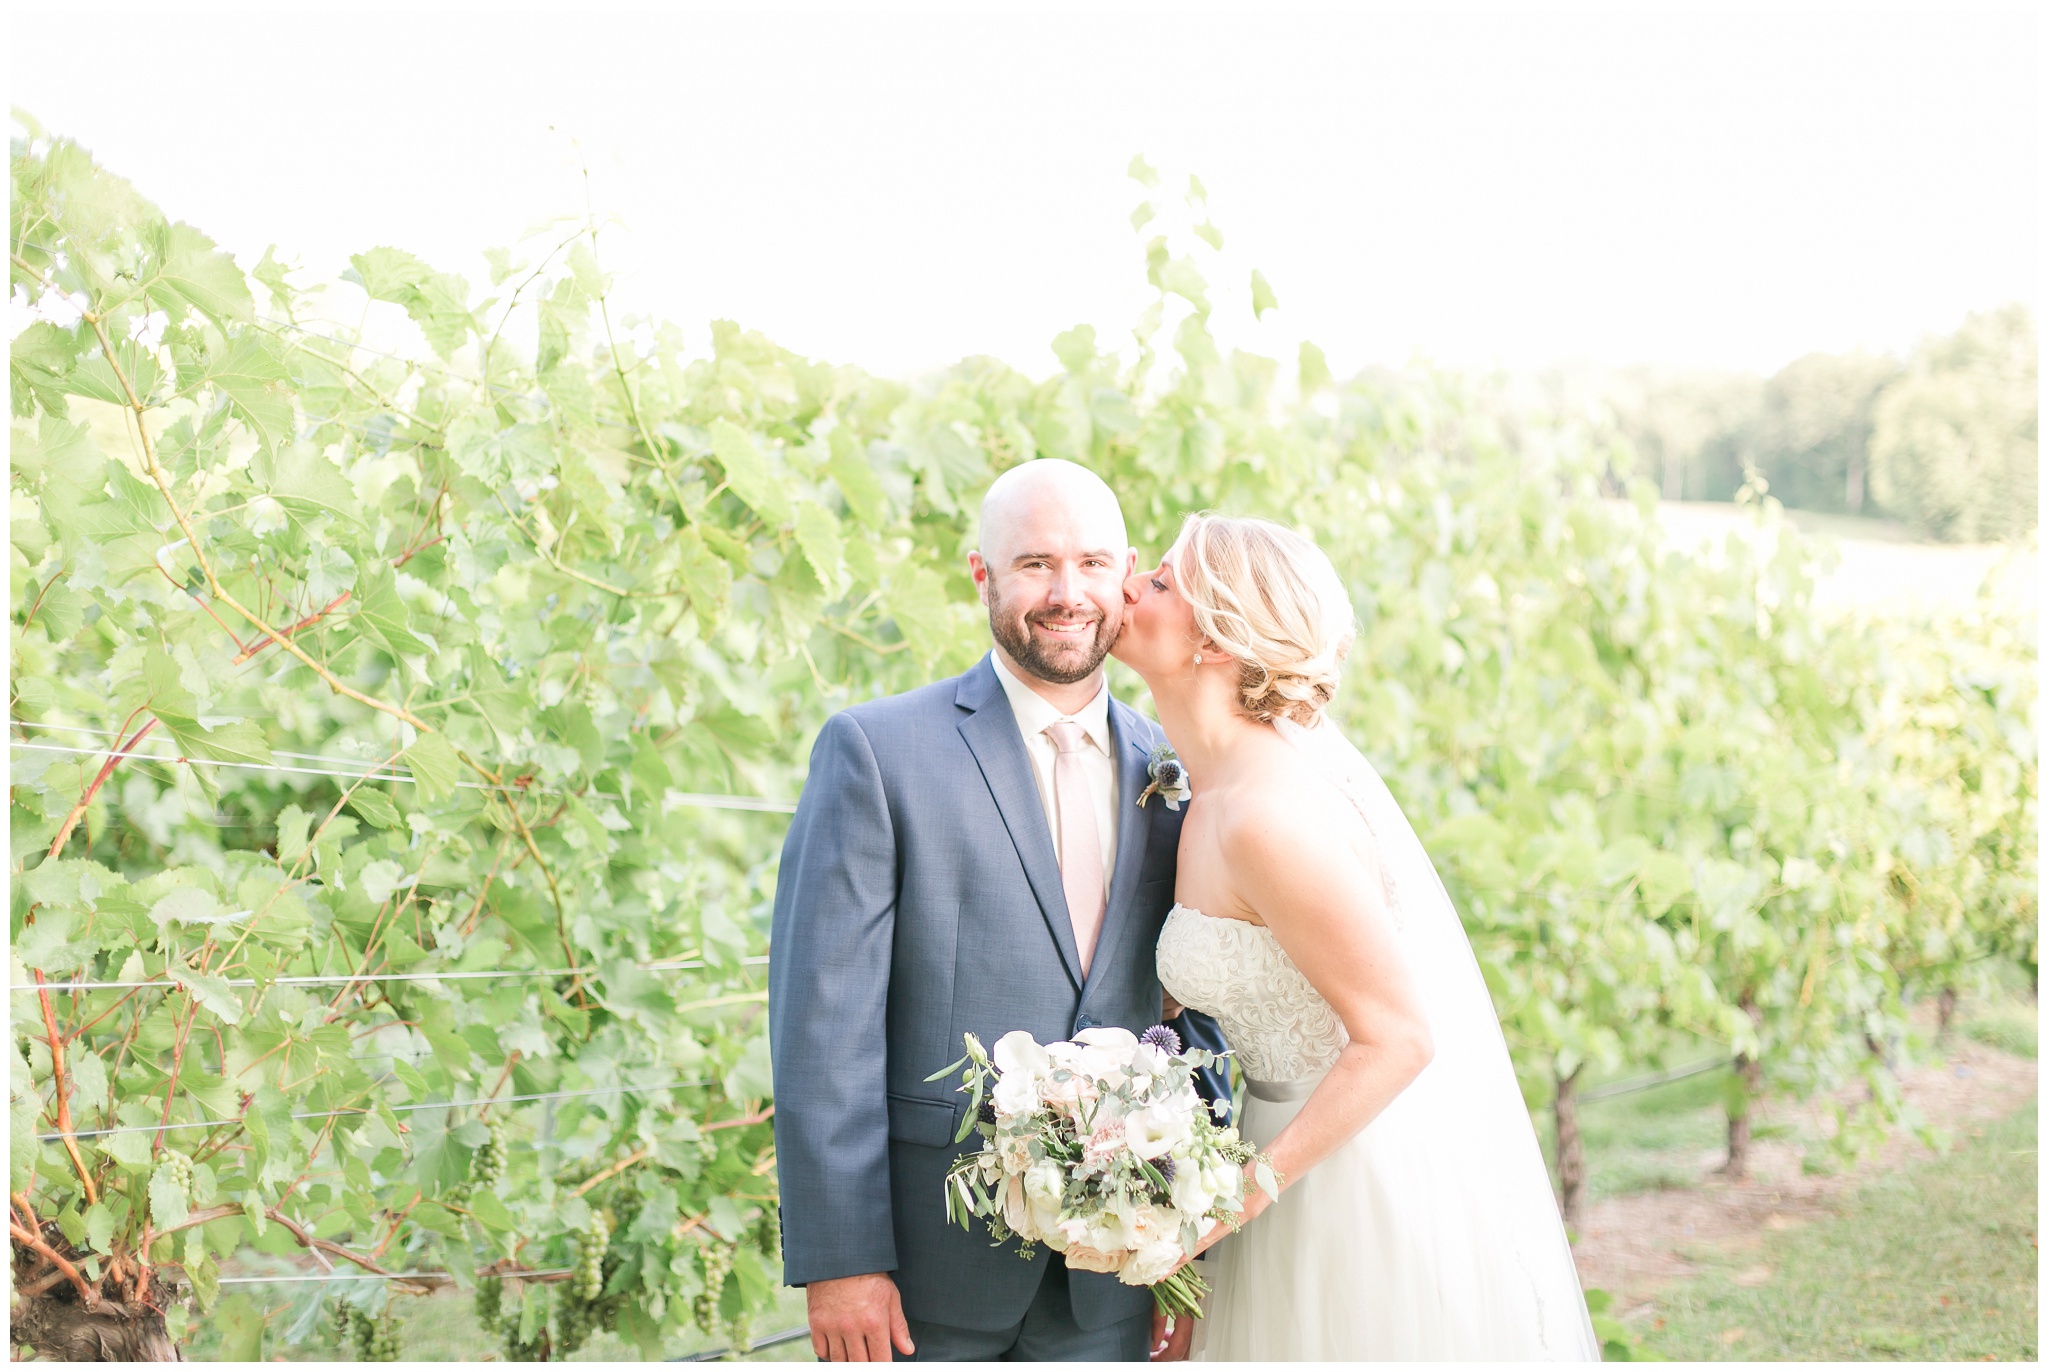 Seacoast New Hampshire Wedding Photographer | Amy Brown Photography | Flag Hill Winery Outdoor NH Wedding 